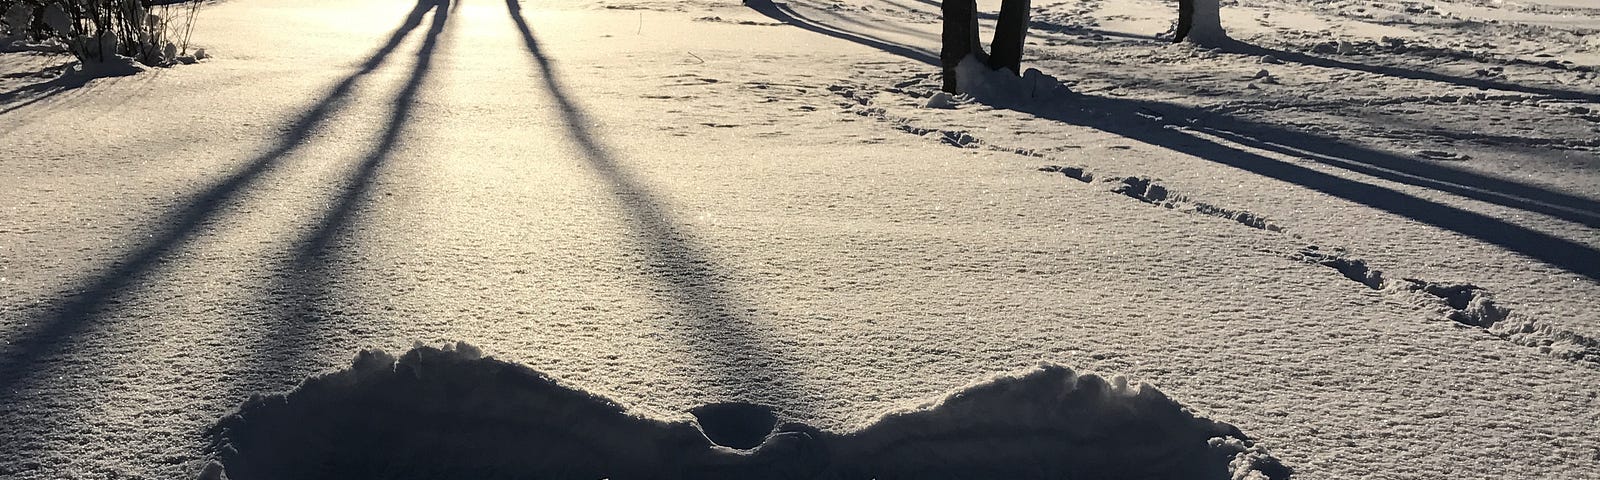 A snow angel lighted by the setting sun.